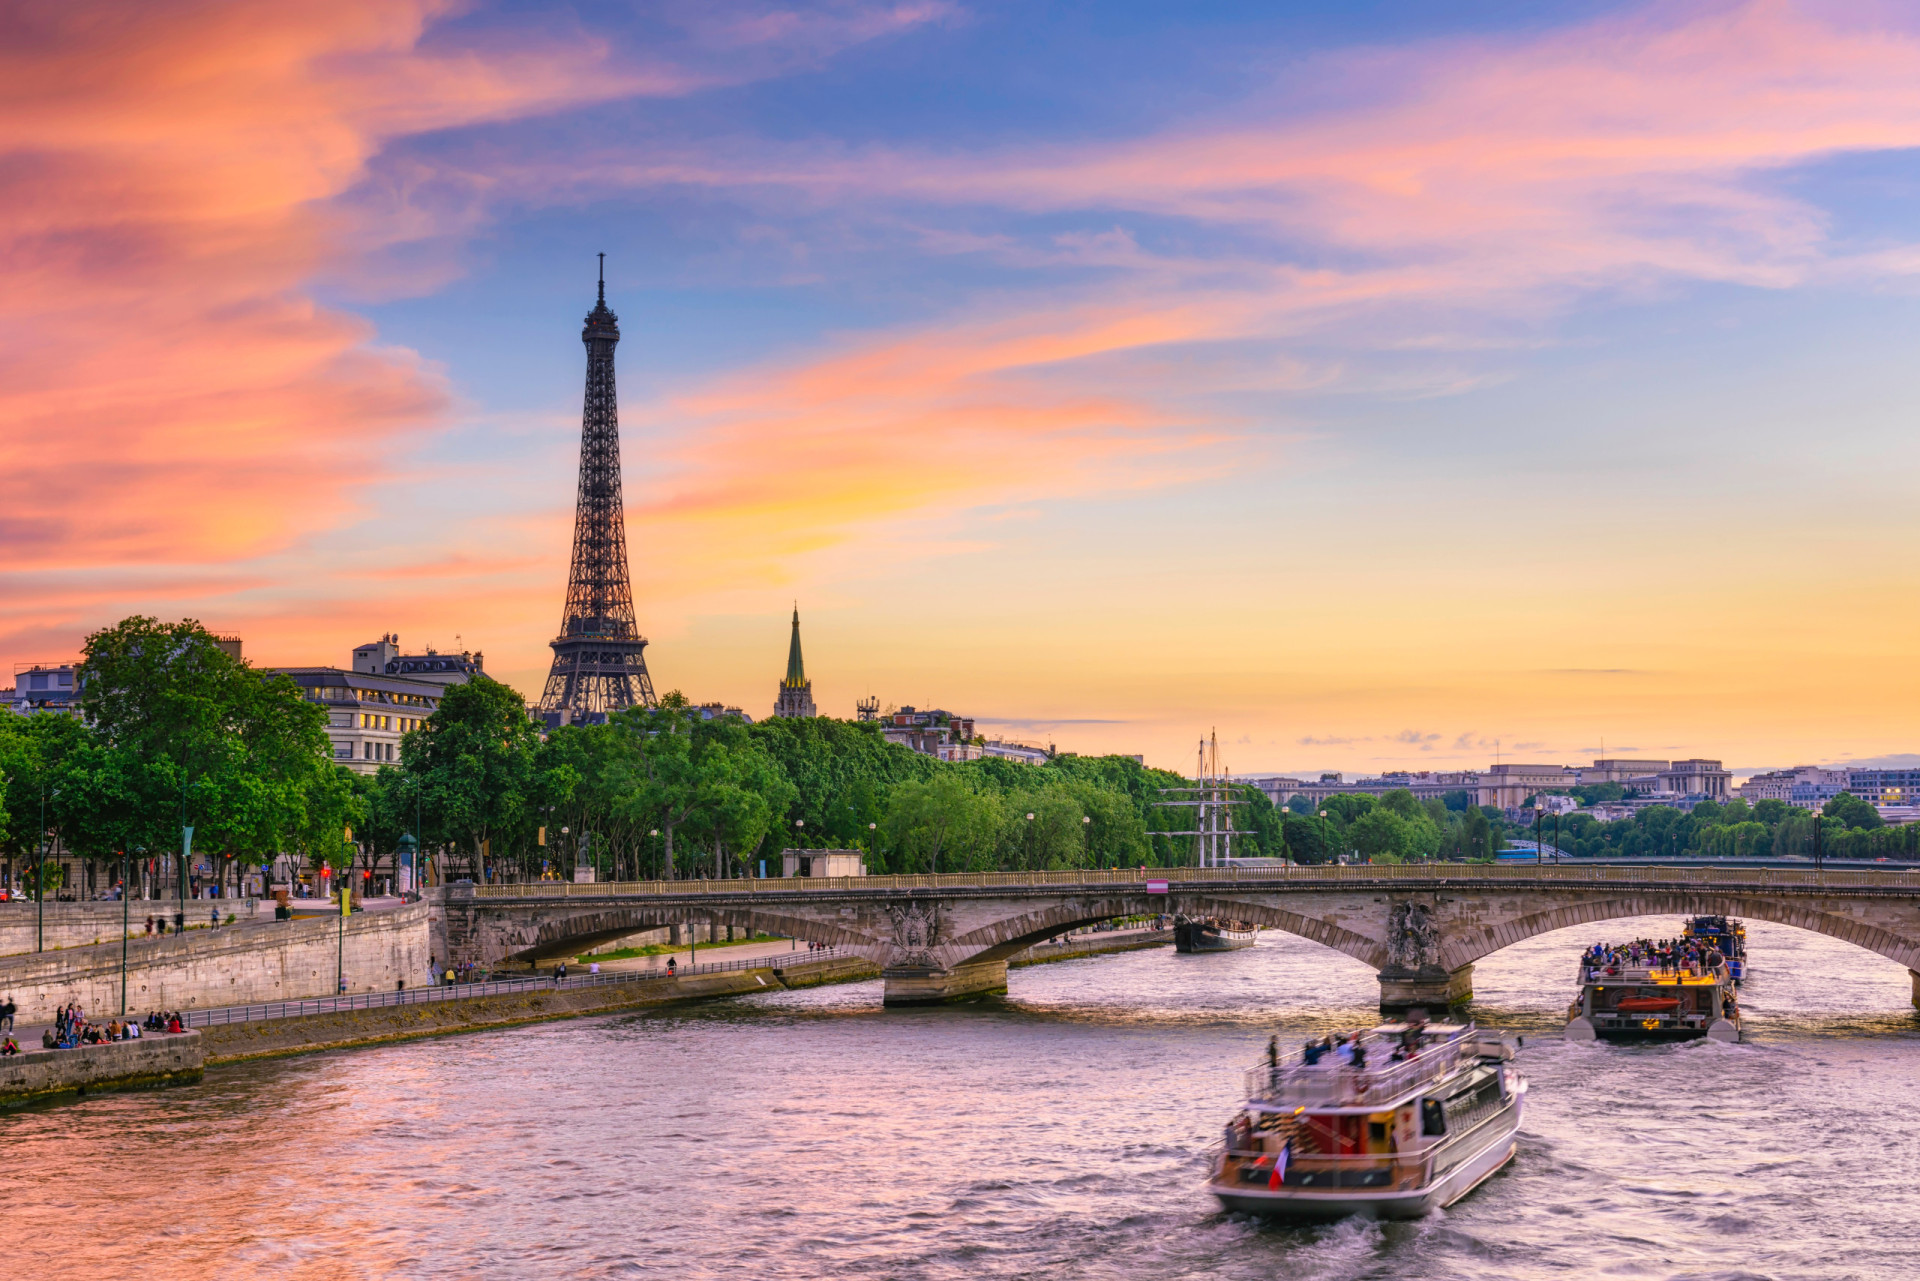 <p>France's <em>taxe de séjour</em> varies depending on city, and tends to be added to your hotel bill per night. The tax is used to maintain tourism infrastructure in popular destinations, such as Paris and Nice.</p><p><a href="https://www.msn.com/en-my/community/channel/vid-7xx8mnucu55yw63we9va2gwr7uihbxwc68fxqp25x6tg4ftibpra?cvid=94631541bc0f4f89bfd59158d696ad7e">Follow us and access great exclusive content every day</a></p>